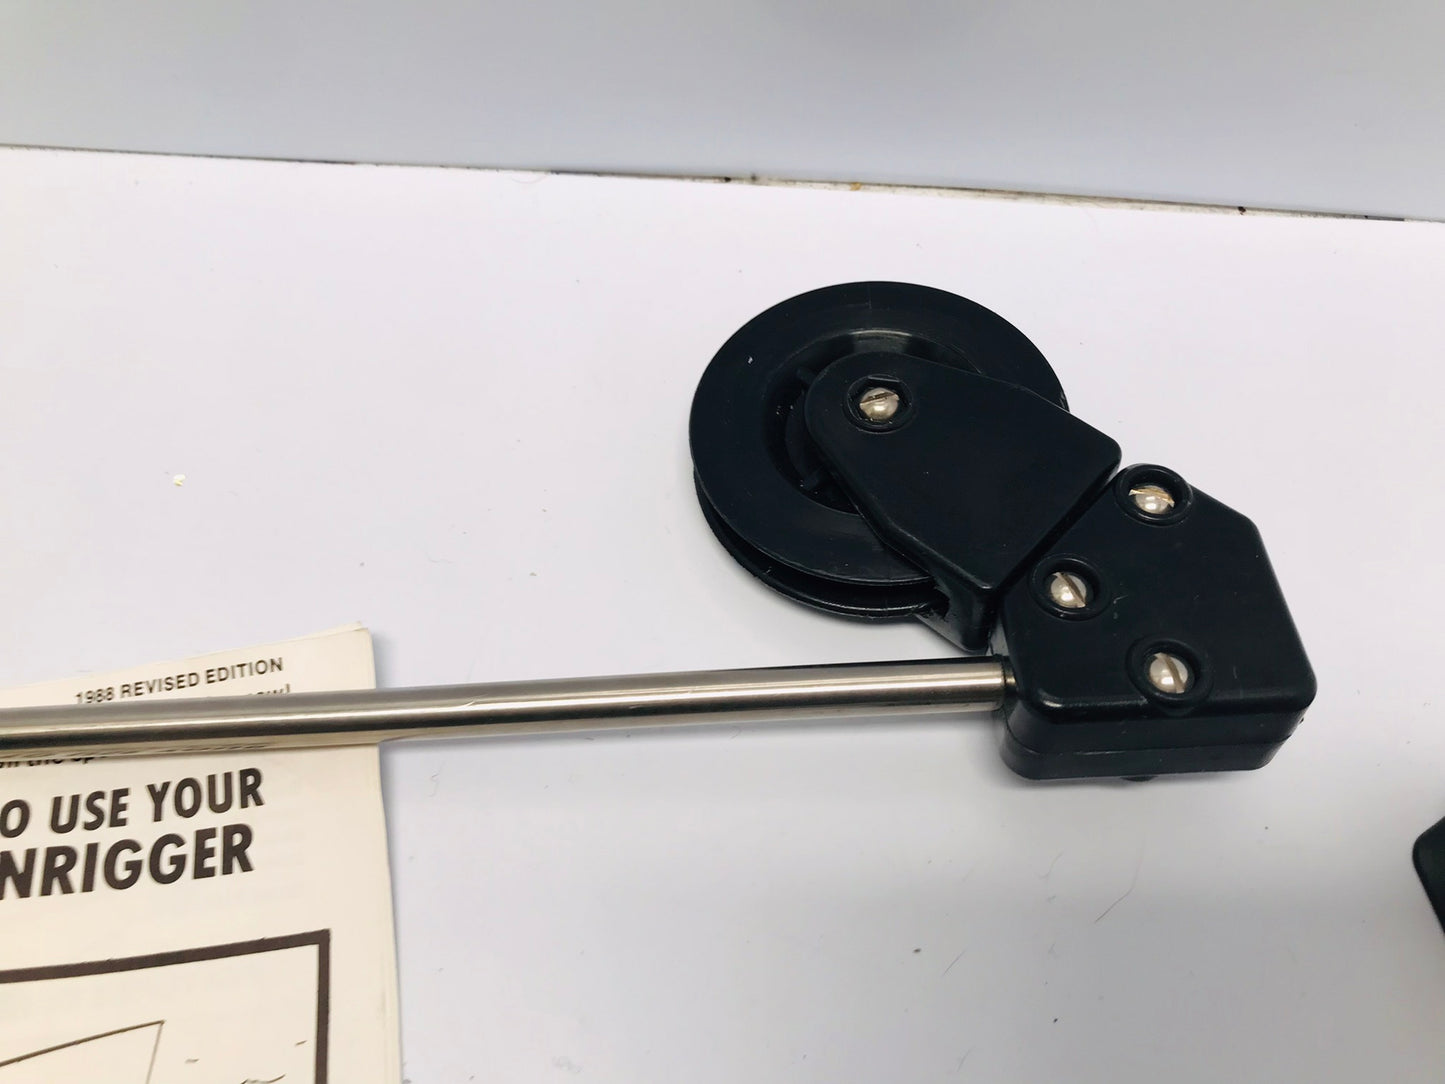 Fishing Adventure Original 1973 Scotty Saltaire Fishing Downrigger Stainless Steel Line Works Perfect Ocean or Lake Great for Kayak, Small Boat or Canoe